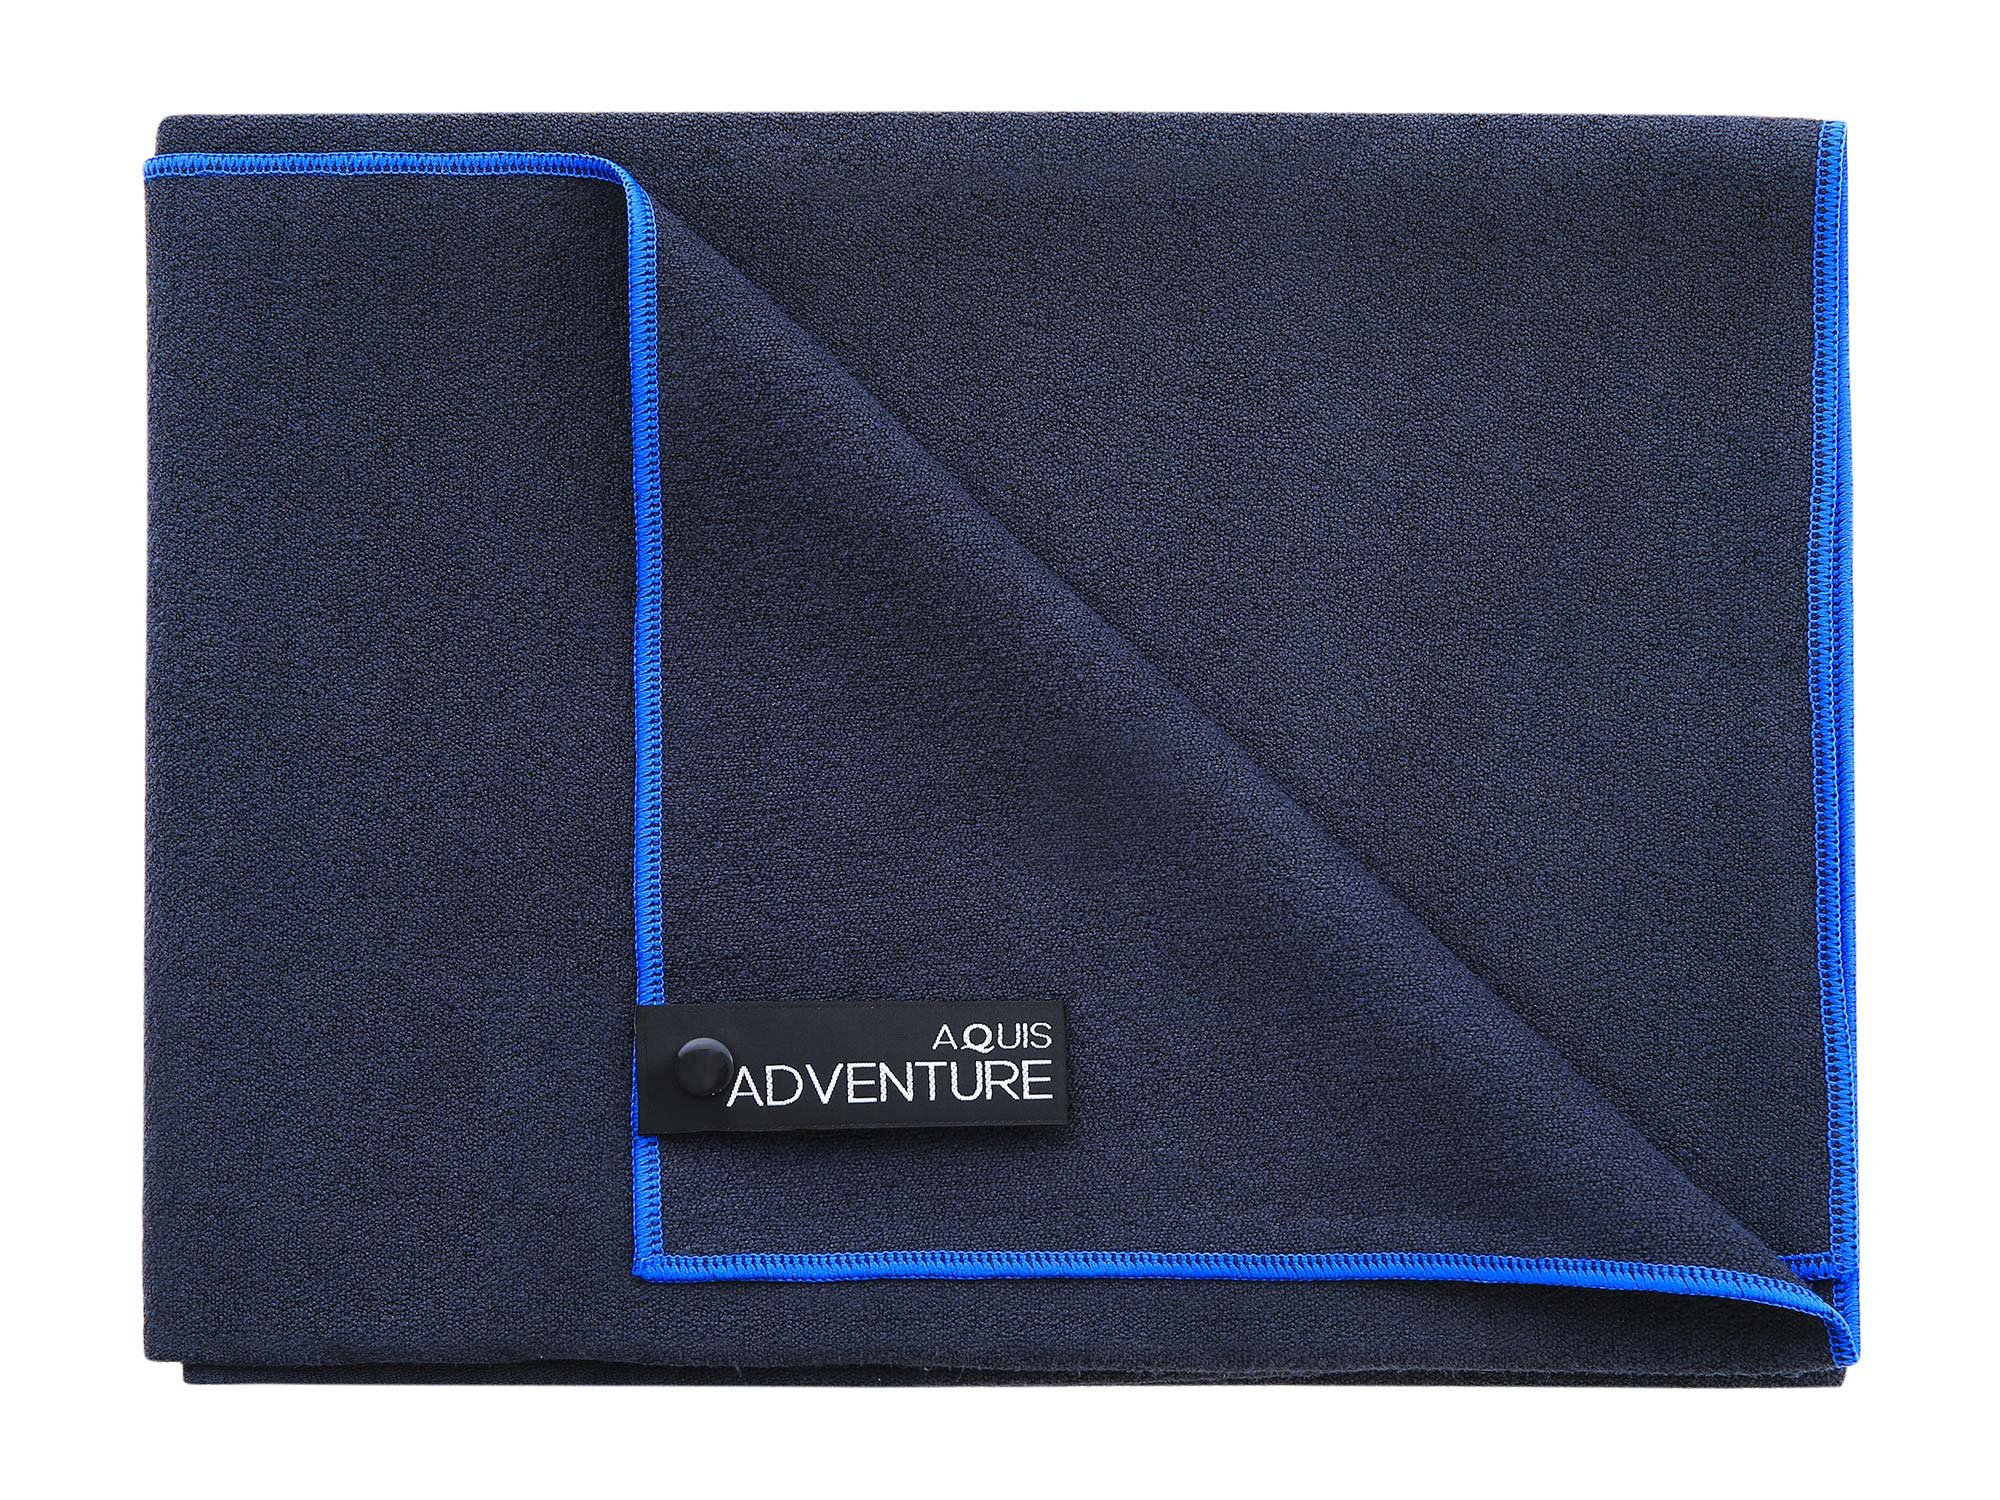 Book Cover Aquis - Adventure Microfiber Sports Towel, Quick-Drying Comfort Ideal for The Beach or Yoga, Black with Blue Trim (X-Large/29 x 55 Inches)